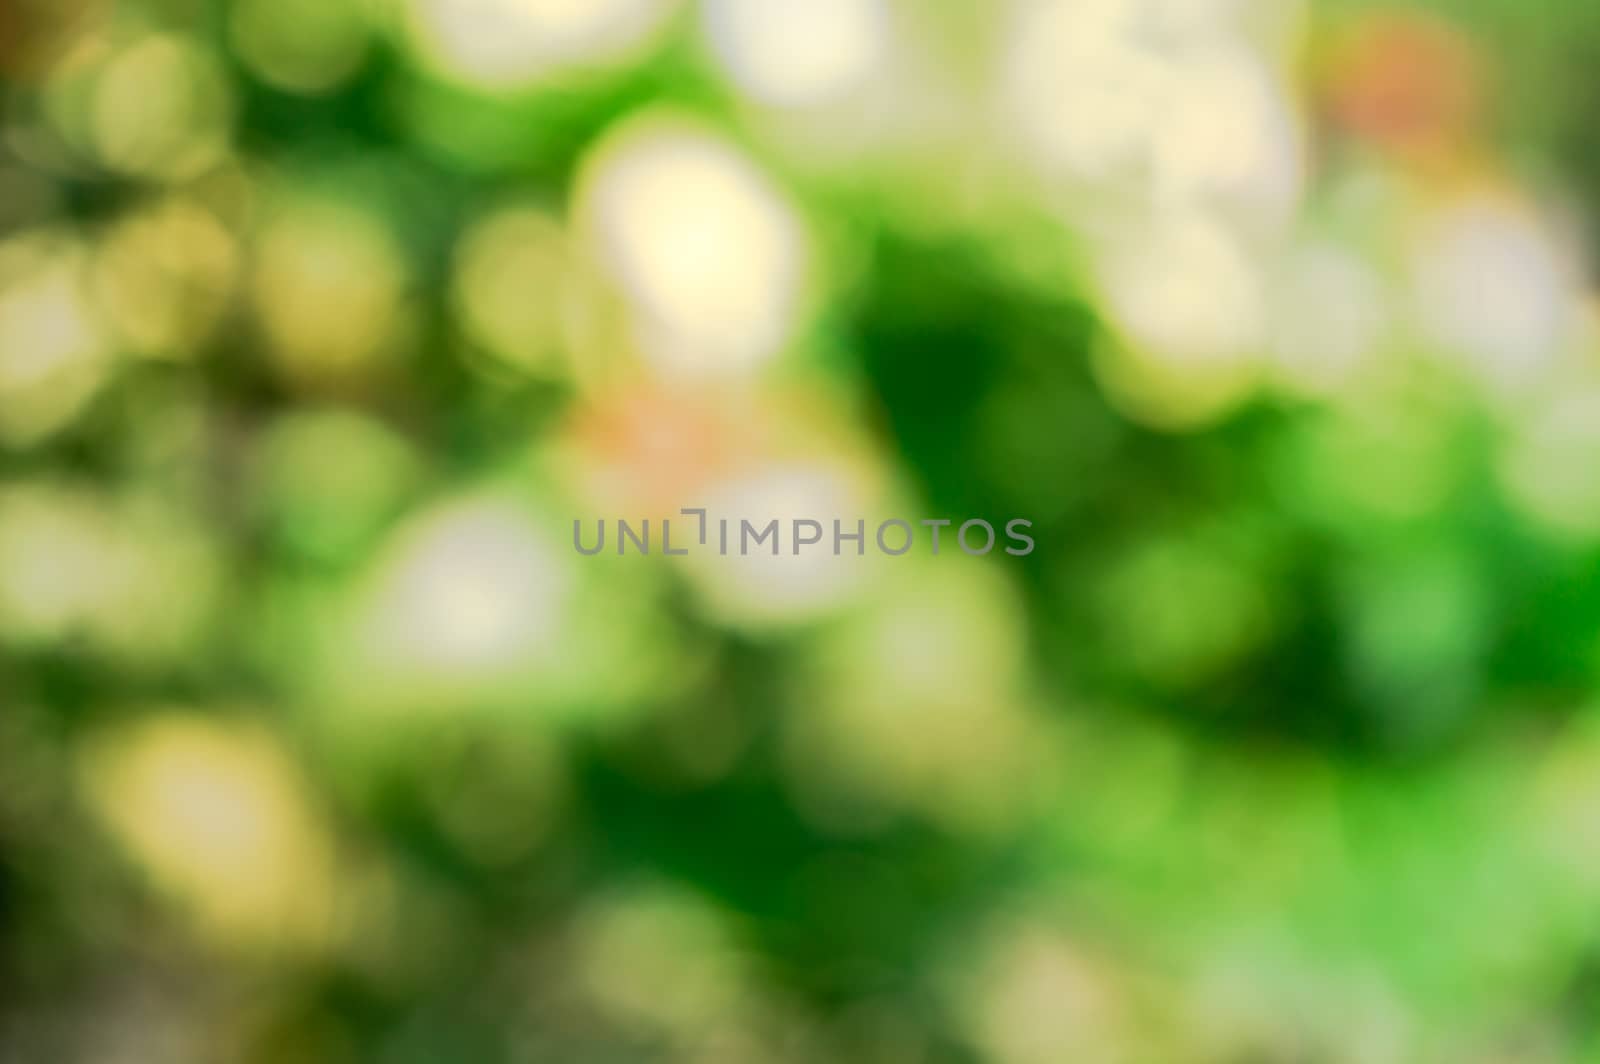 Shiny highlights of Sunlight shines through Out of focus Green leaves create a beautiful bokeh composition. Nature Background image. Cpoy Space room for black color text on green background.